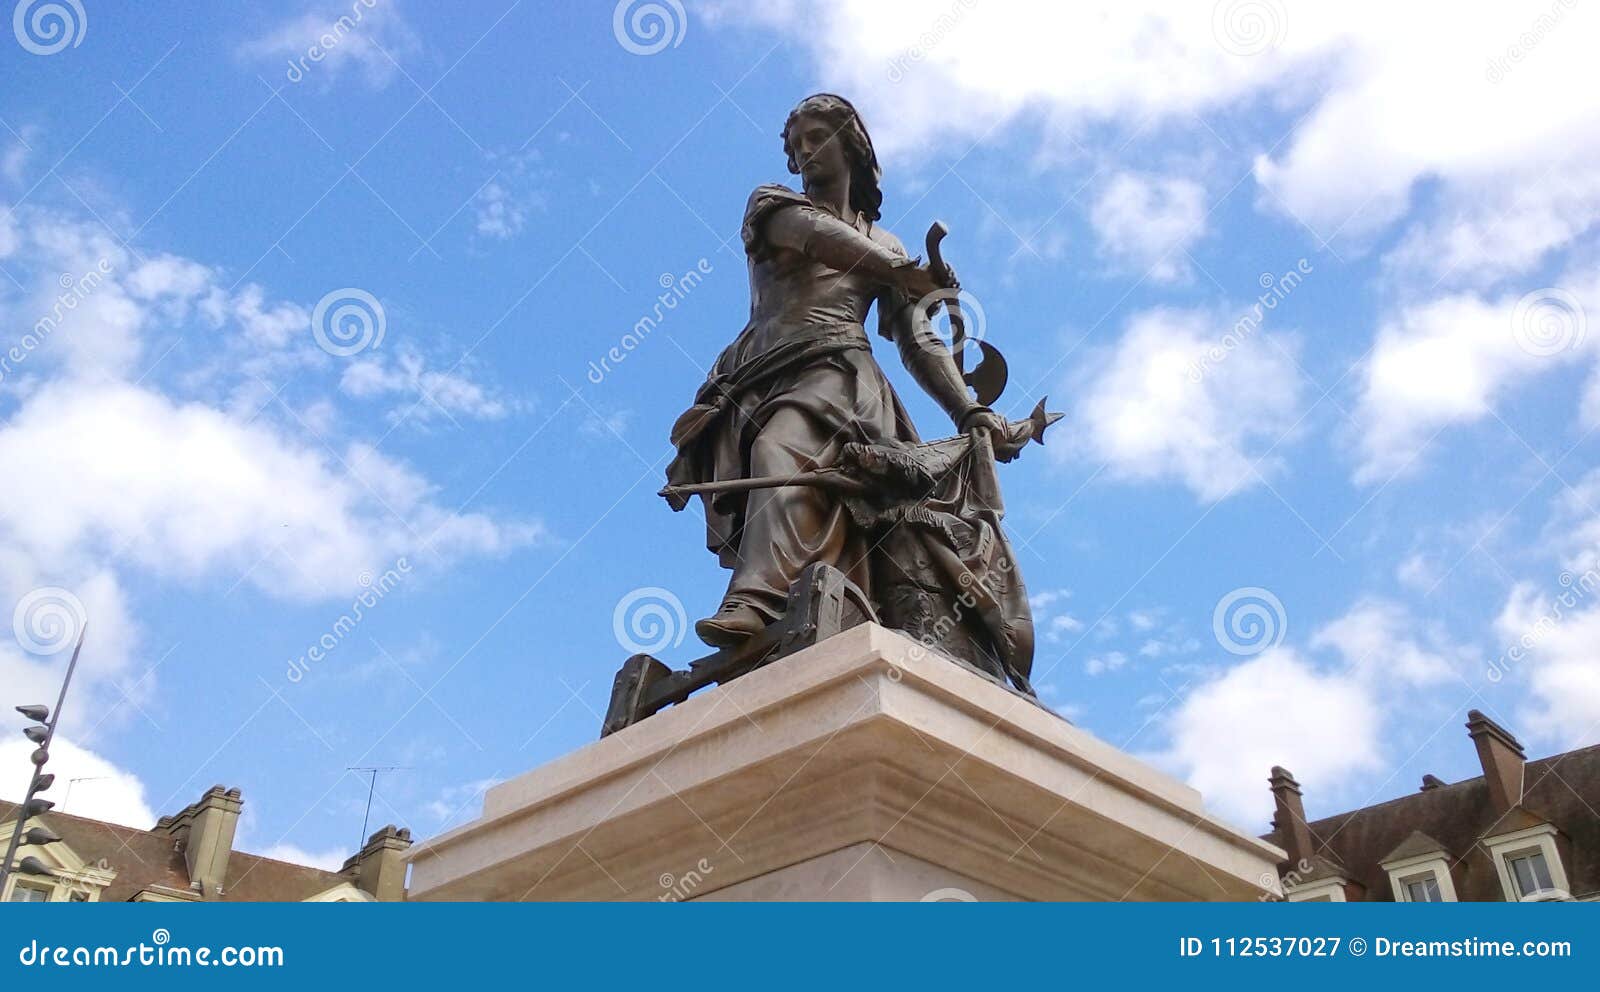 statue of joan of arc on a sunny day